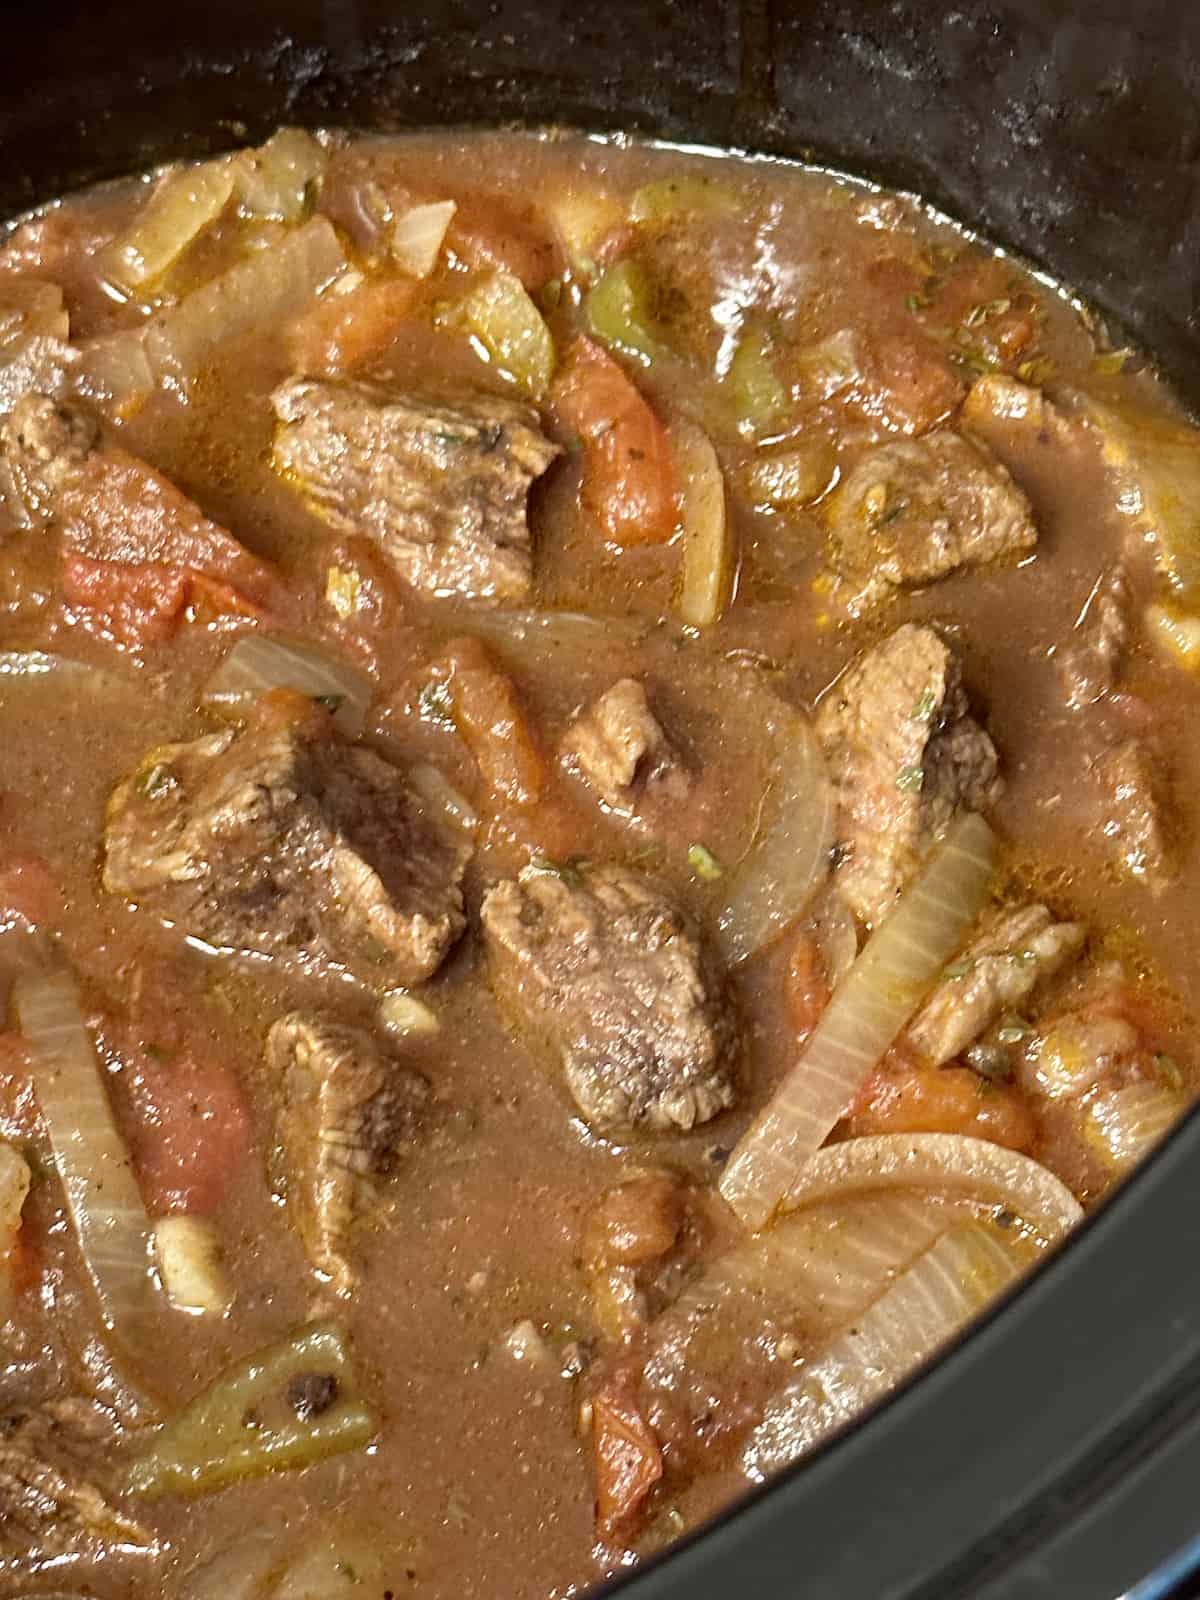 cooked vegetables and beef in a crockpot